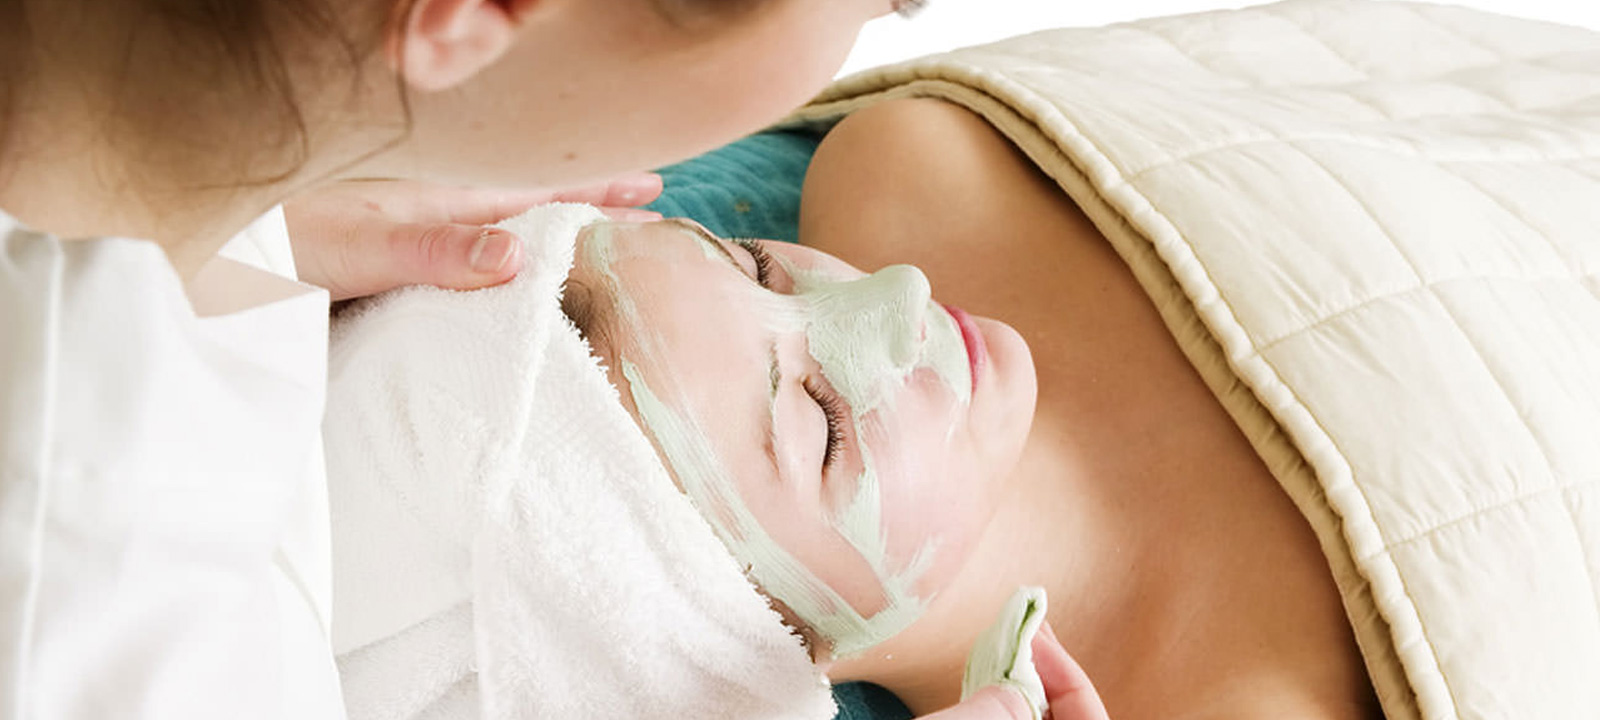 Our facials do more than just treat the surface